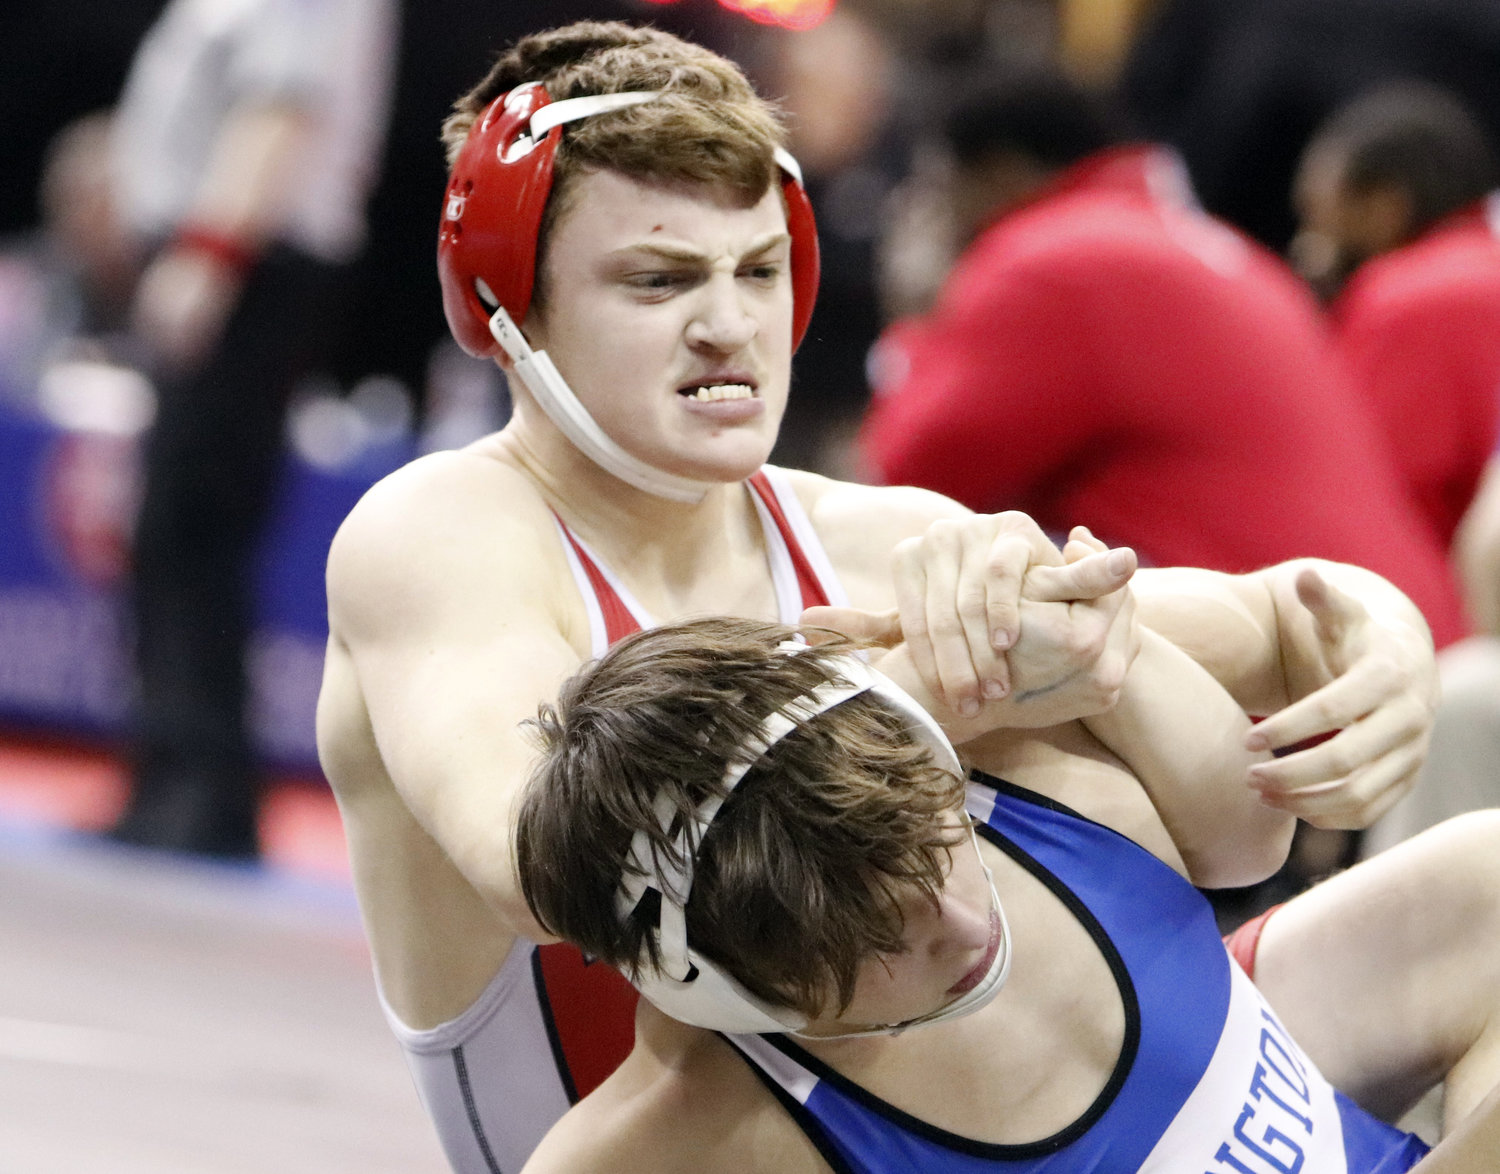 Joshua Kassing (left) controls his Dominic Stafford of Jefferson City during the Class 3 state wrestling tournament.